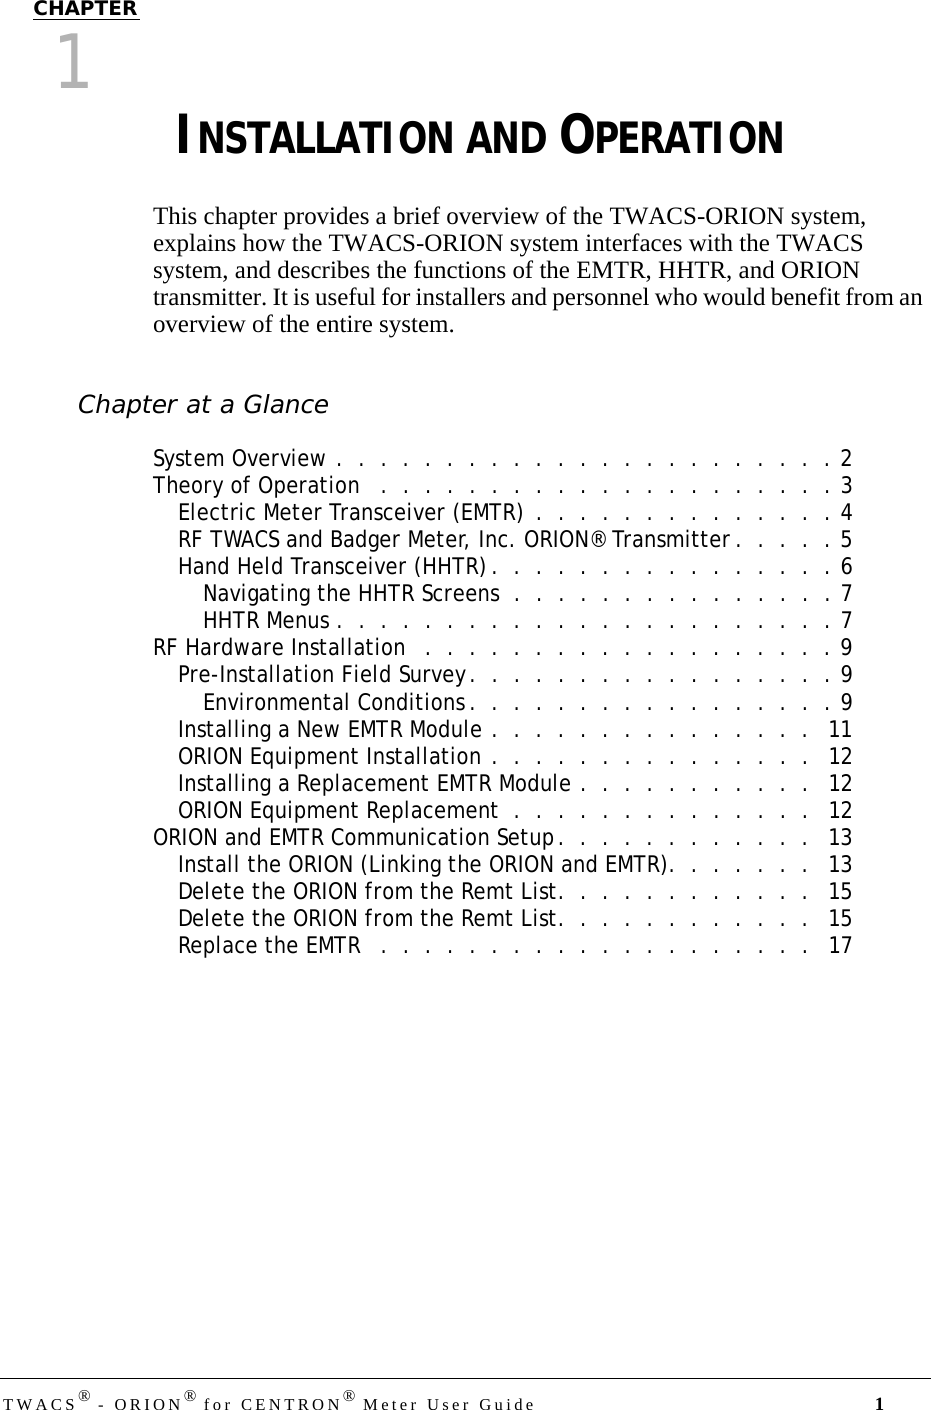 TWACS® - ORION® for CENTRON® Meter User Guide 1CHAPTER 0CHAPTER1CHAPTER 0INSTALLATION AND OPERATIONThis chapter provides a brief overview of the TWACS-ORION system, explains how the TWACS-ORION system interfaces with the TWACS system, and describes the functions of the EMTR, HHTR, and ORION transmitter. It is useful for installers and personnel who would benefit from an overview of the entire system.Chapter at a GlanceSystem Overview .  .  .  .  .  .  .  .  .  .  .  .  .  .  .  .  .  .  .  .  .  .  . 2Theory of Operation   .  .  .  .  .  .  .  .  .  .  .  .  .  .  .  .  .  .  .  .  . 3Electric Meter Transceiver (EMTR)  .  .  .  .  .  .  .  .  .  .  .  .  .  . 4RF TWACS and Badger Meter, Inc. ORION® Transmitter .  .  .  .  . 5Hand Held Transceiver (HHTR) .  .  .  .  .  .  .  .  .  .  .  .  .  .  .  . 6Navigating the HHTR Screens  .  .  .  .  .  .  .  .  .  .  .  .  .  .  . 7HHTR Menus .  .  .  .  .  .  .  .  .  .  .  .  .  .  .  .  .  .  .  .  .  .  . 7RF Hardware Installation   .  .  .  .  .  .  .  .  .  .  .  .  .  .  .  .  .  .  . 9Pre-Installation Field Survey.  .  .  .  .  .  .  .  .  .  .  .  .  .  .  .  . 9Environmental Conditions .  .  .  .  .  .  .  .  .  .  .  .  .  .  .  .  . 9Installing a New EMTR Module .  .  .  .  .  .  .  .  .  .  .  .  .  .  .   11ORION Equipment Installation .  .  .  .  .  .  .  .  .  .  .  .  .  .  .   12Installing a Replacement EMTR Module .  .  .  .  .  .  .  .  .  .  .   12ORION Equipment Replacement  .  .  .  .  .  .  .  .  .  .  .  .  .  .   12ORION and EMTR Communication Setup.  .  .  .  .  .  .  .  .  .  .  .   13Install the ORION (Linking the ORION and EMTR).  .  .  .  .  .  .   13Delete the ORION from the Remt List.  .  .  .  .  .  .  .  .  .  .  .   15Delete the ORION from the Remt List.  .  .  .  .  .  .  .  .  .  .  .   15Replace the EMTR   .  .  .  .  .  .  .  .  .  .  .  .  .  .  .  .  .  .  .  .   17